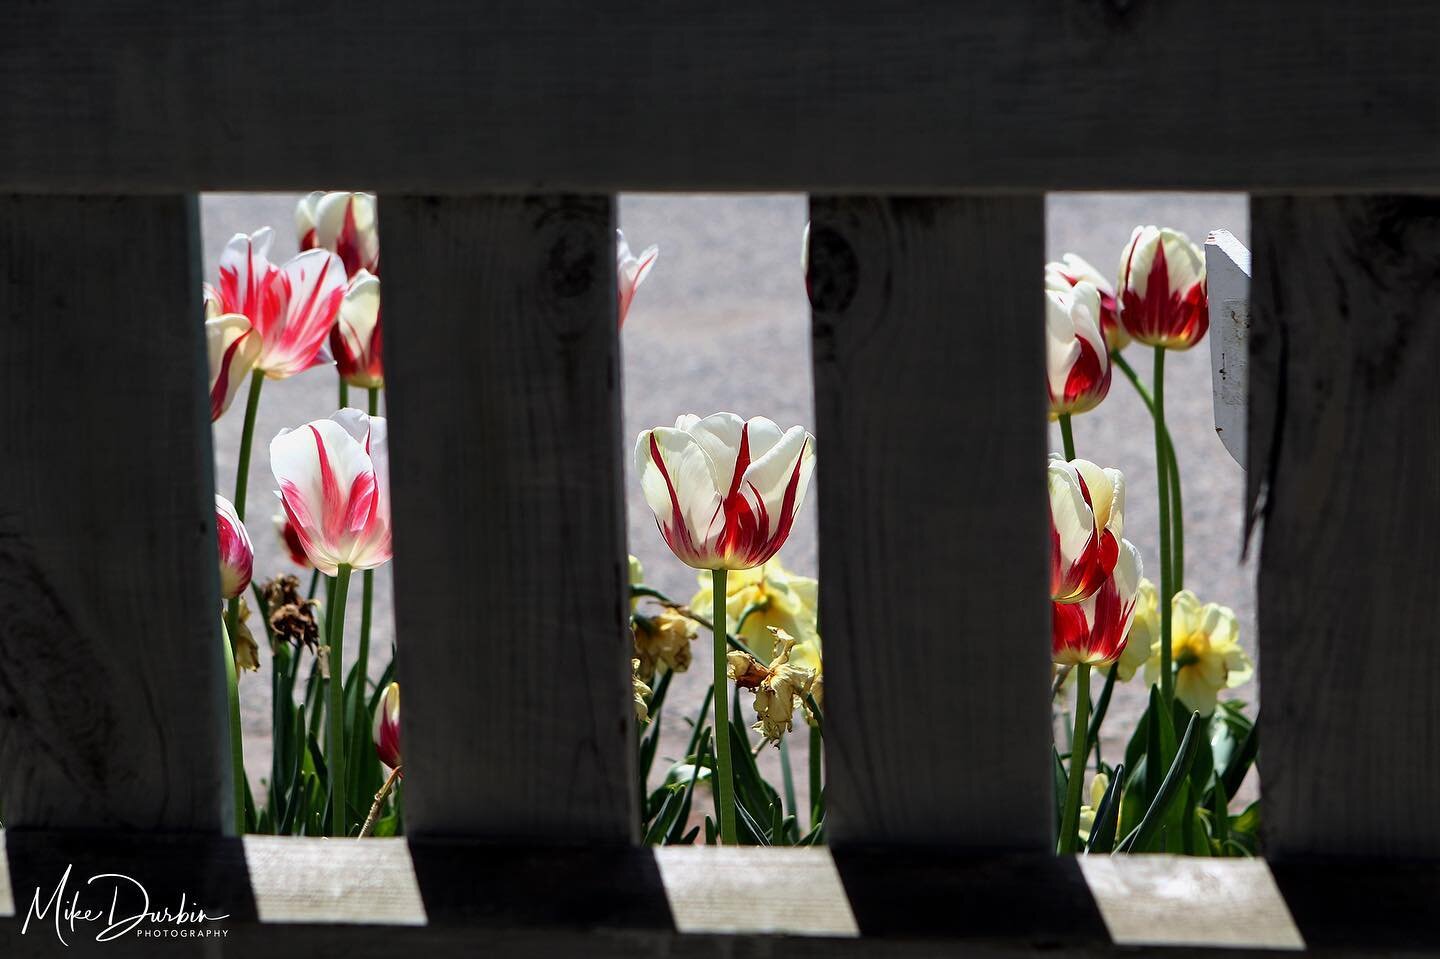 @tulip_time @veldheertulipgarden 🌷

While resting on a bench outside of the pottery and shoe factory at Veldheer Tulip Gardens last week, I noticed the way openings in the picket fence lining the porch framed the tulips in the bed just beyond it and